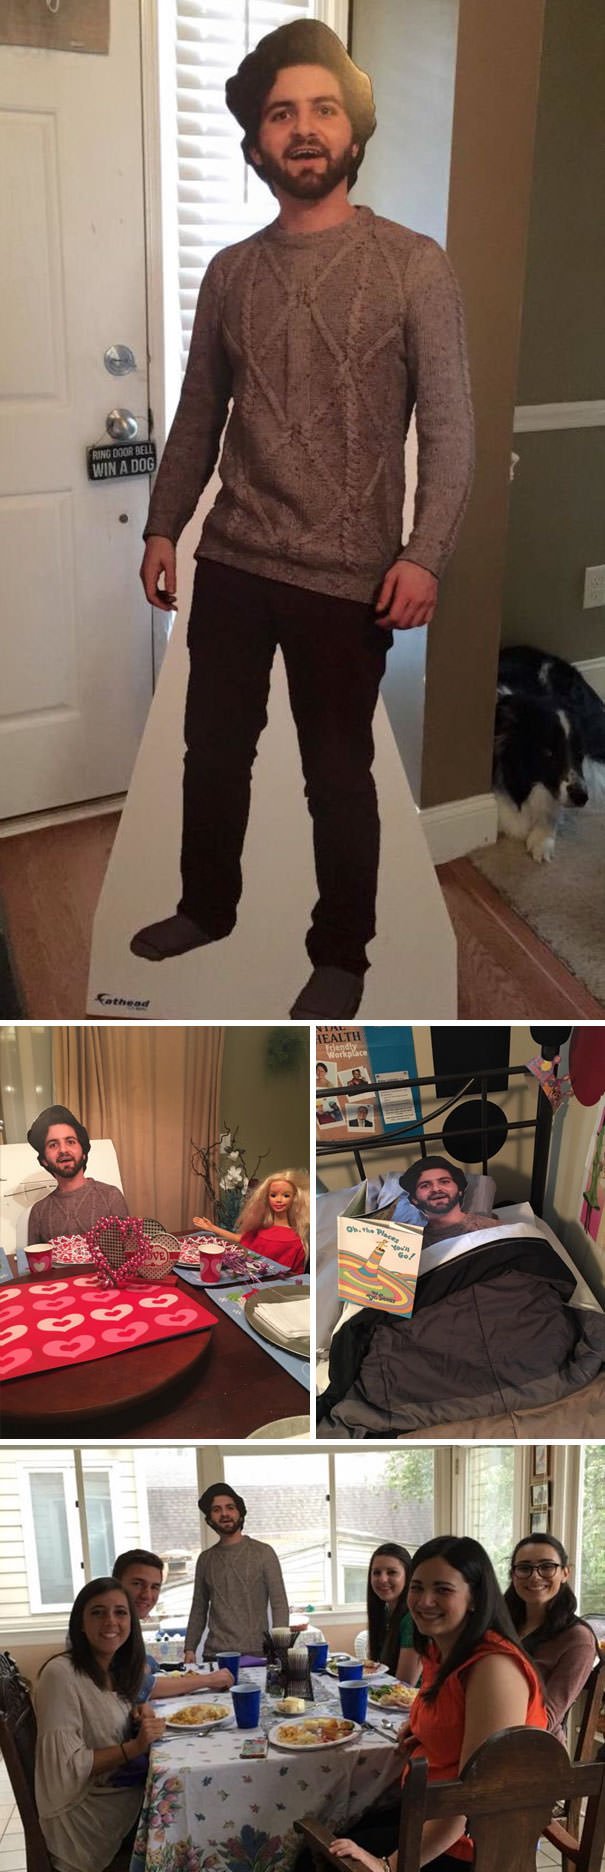 Son Studying Abroad Sent Mom Cutout Of Himself And Thought They